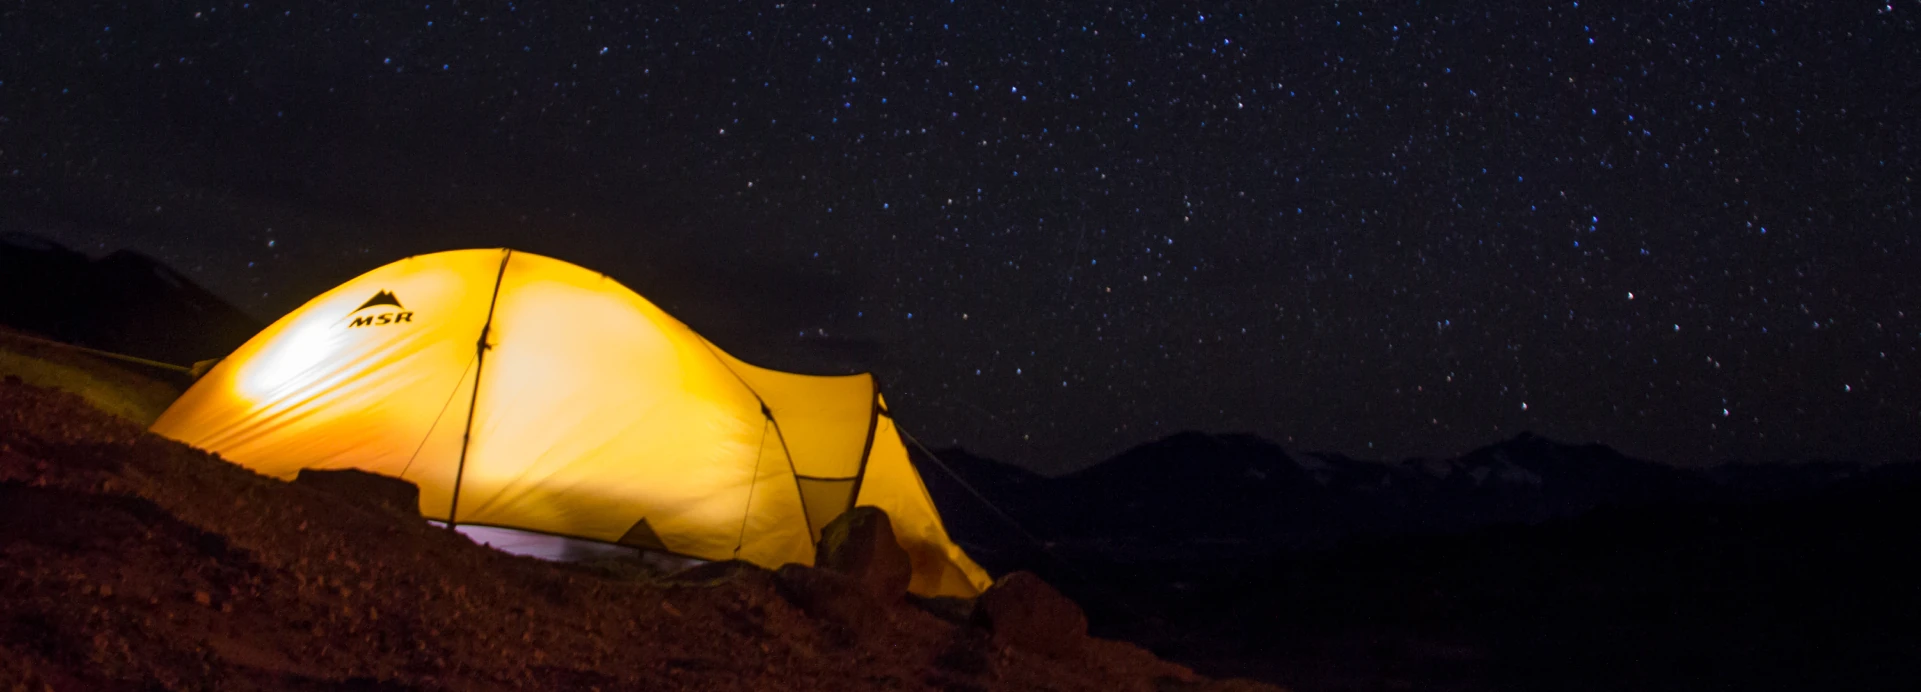 A starry night at the Ojos del Salado camp site